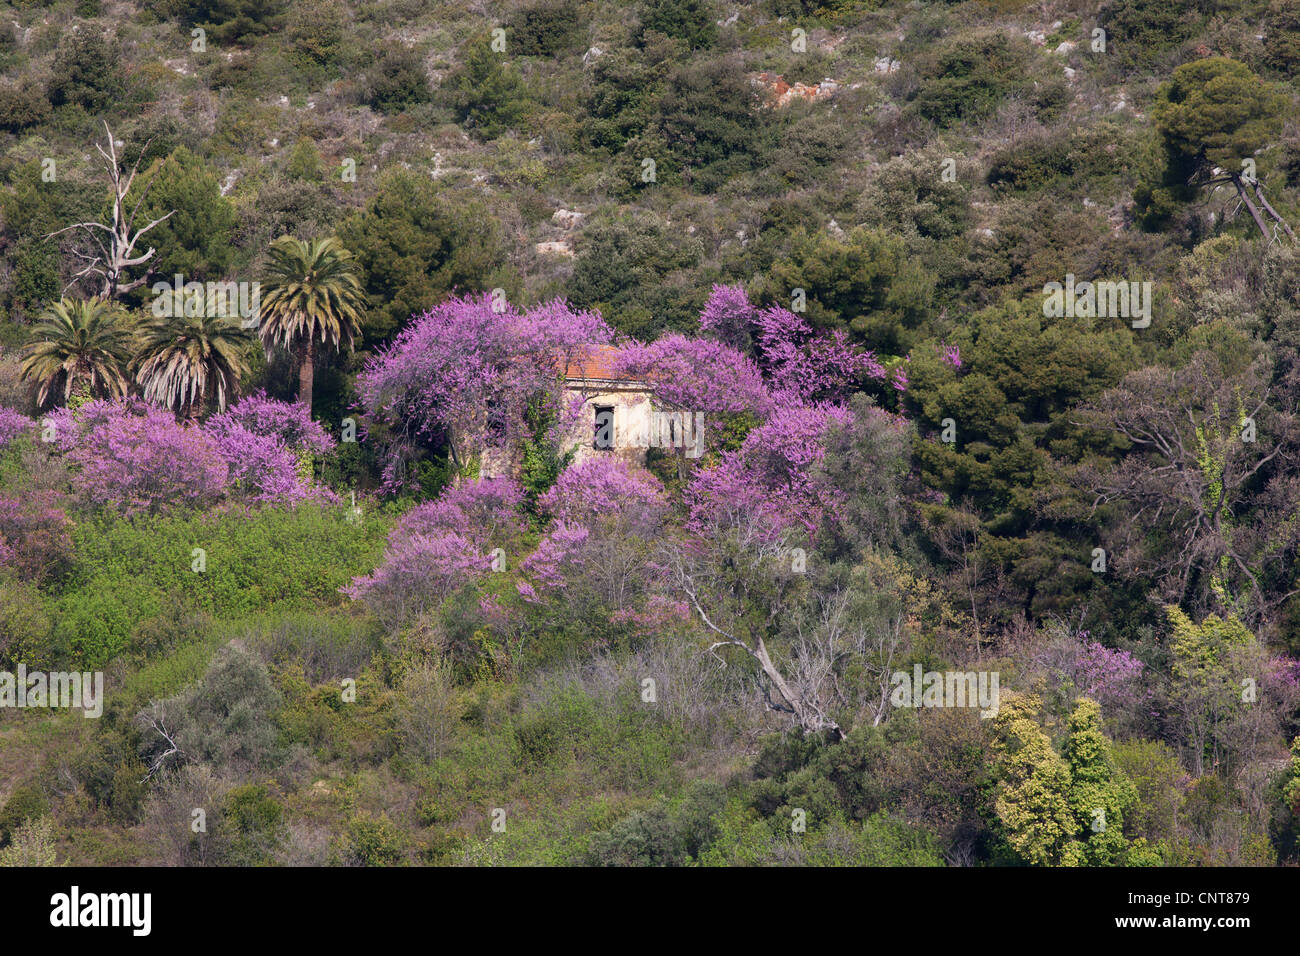 Abandoned house in a grove of trees in full bloom. Villefranche-sur-Mer, French Riviera, France. Stock Photo